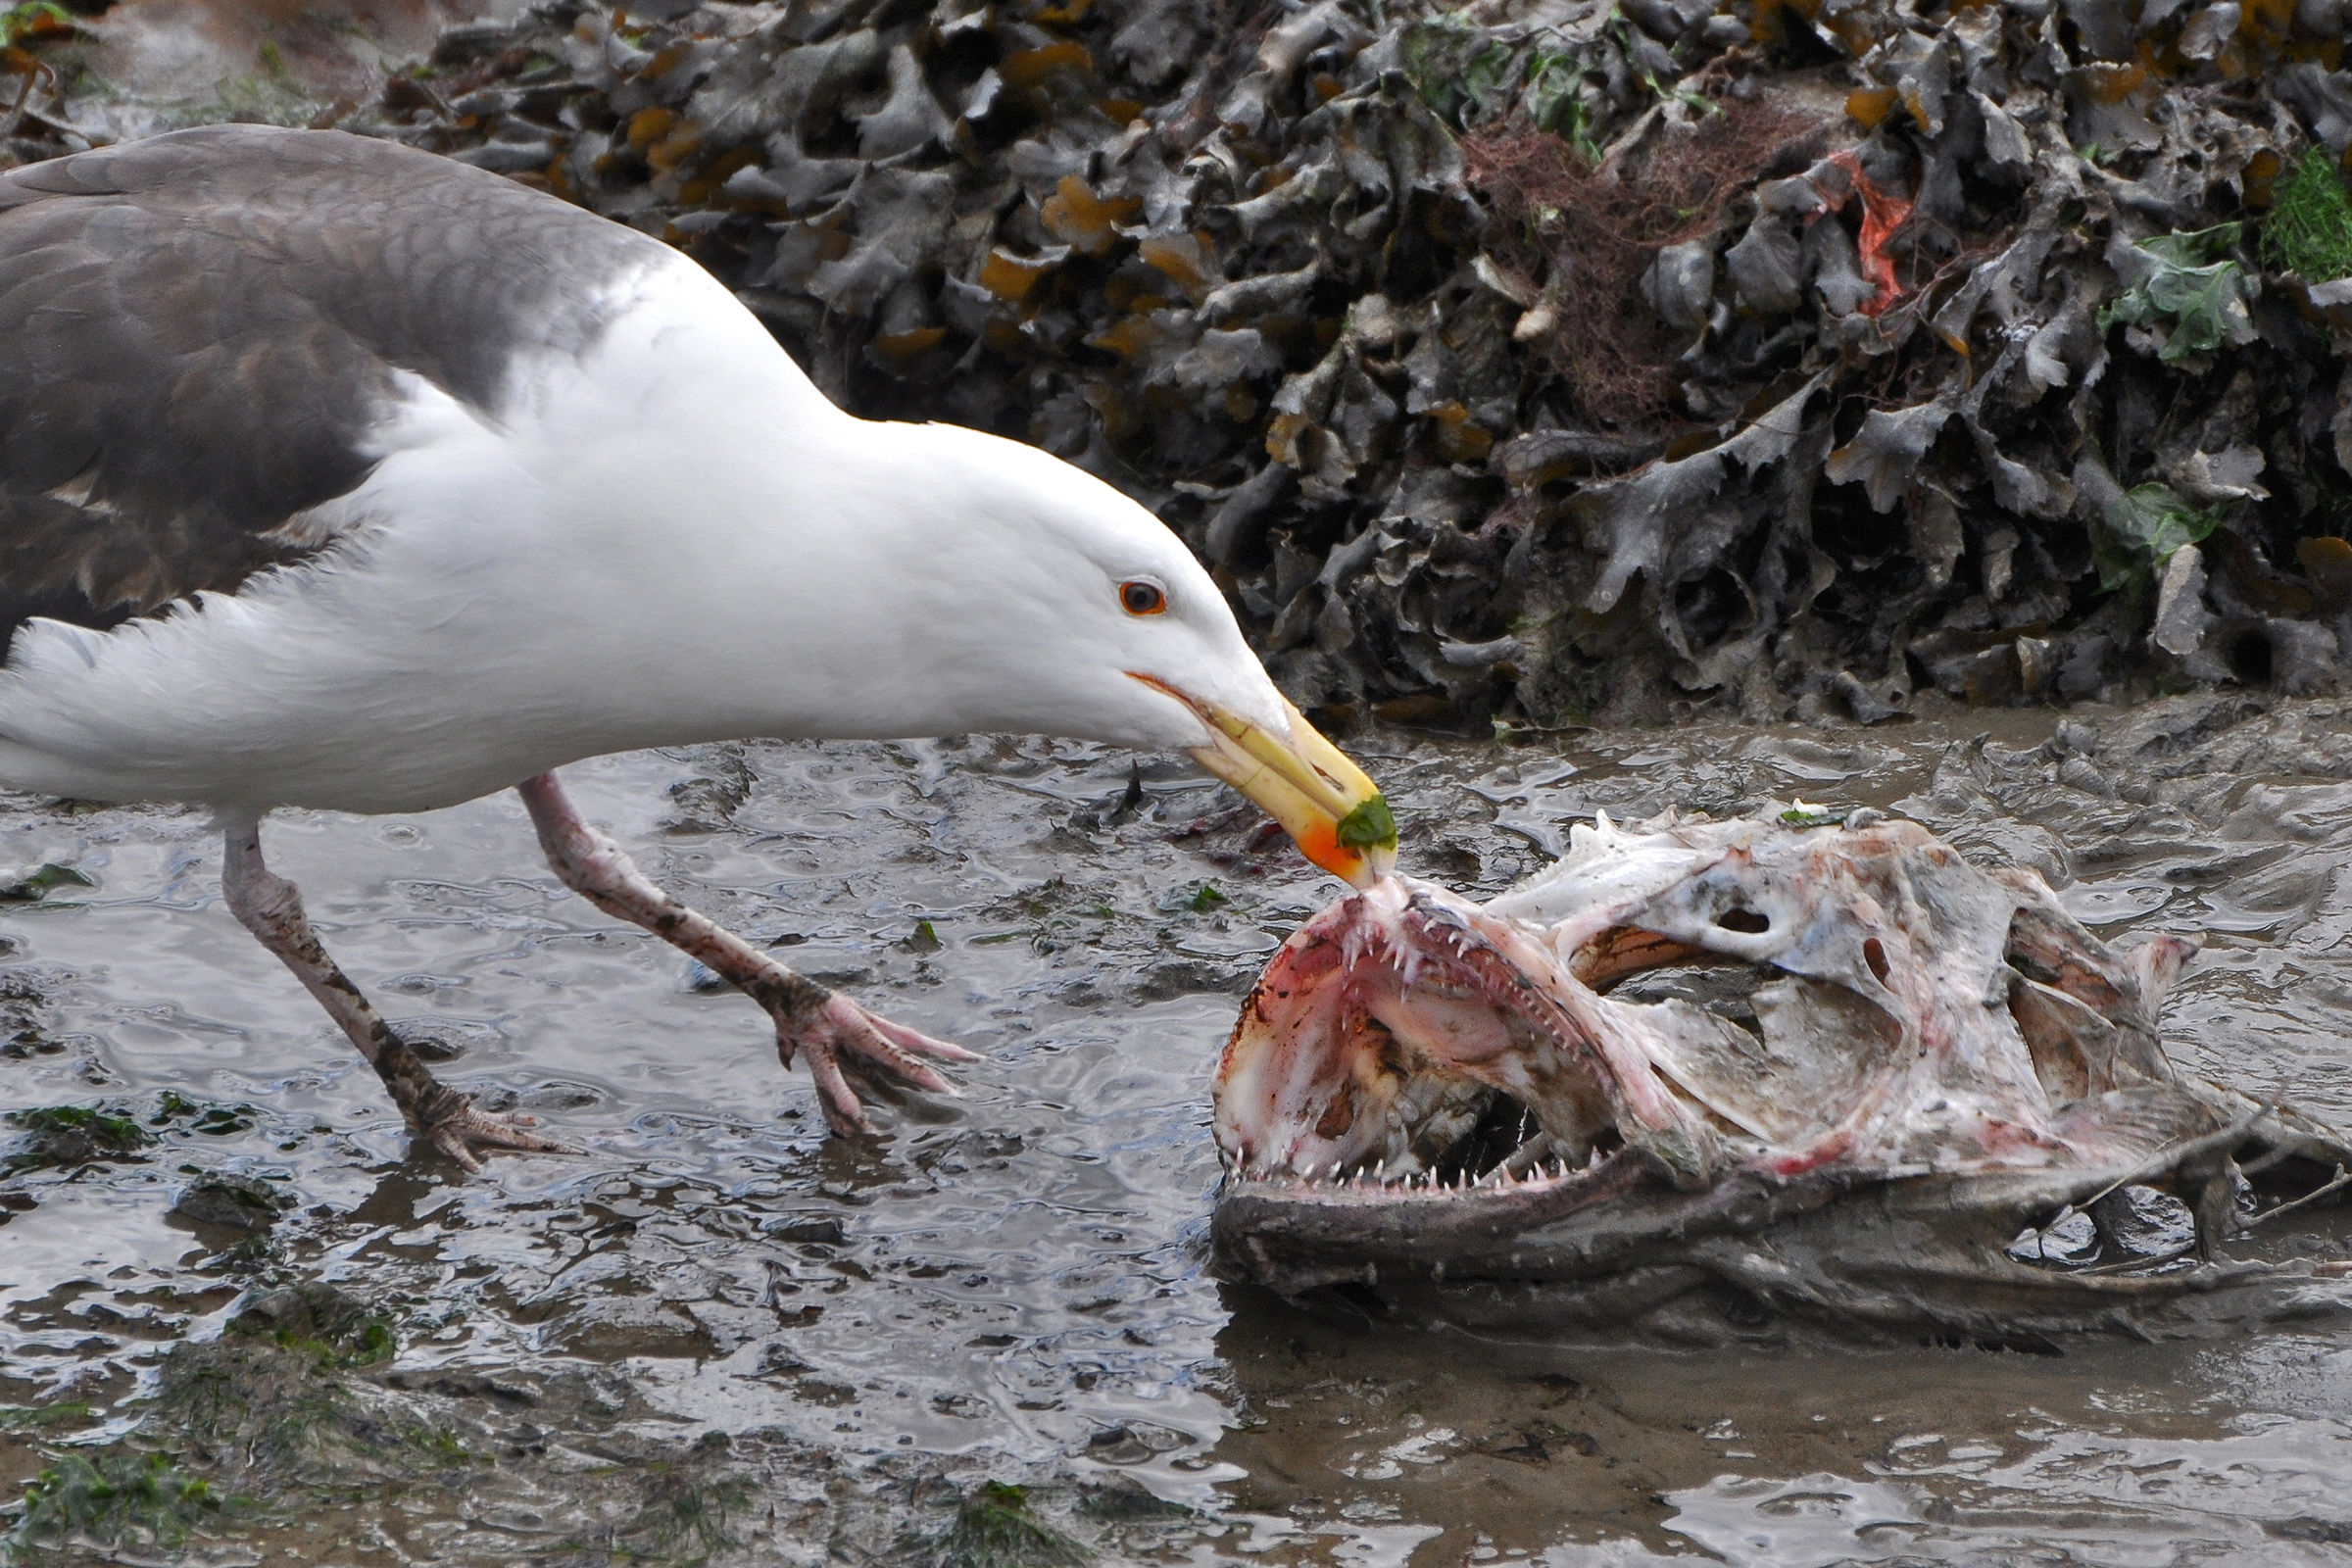 The seagull and the monkfish...